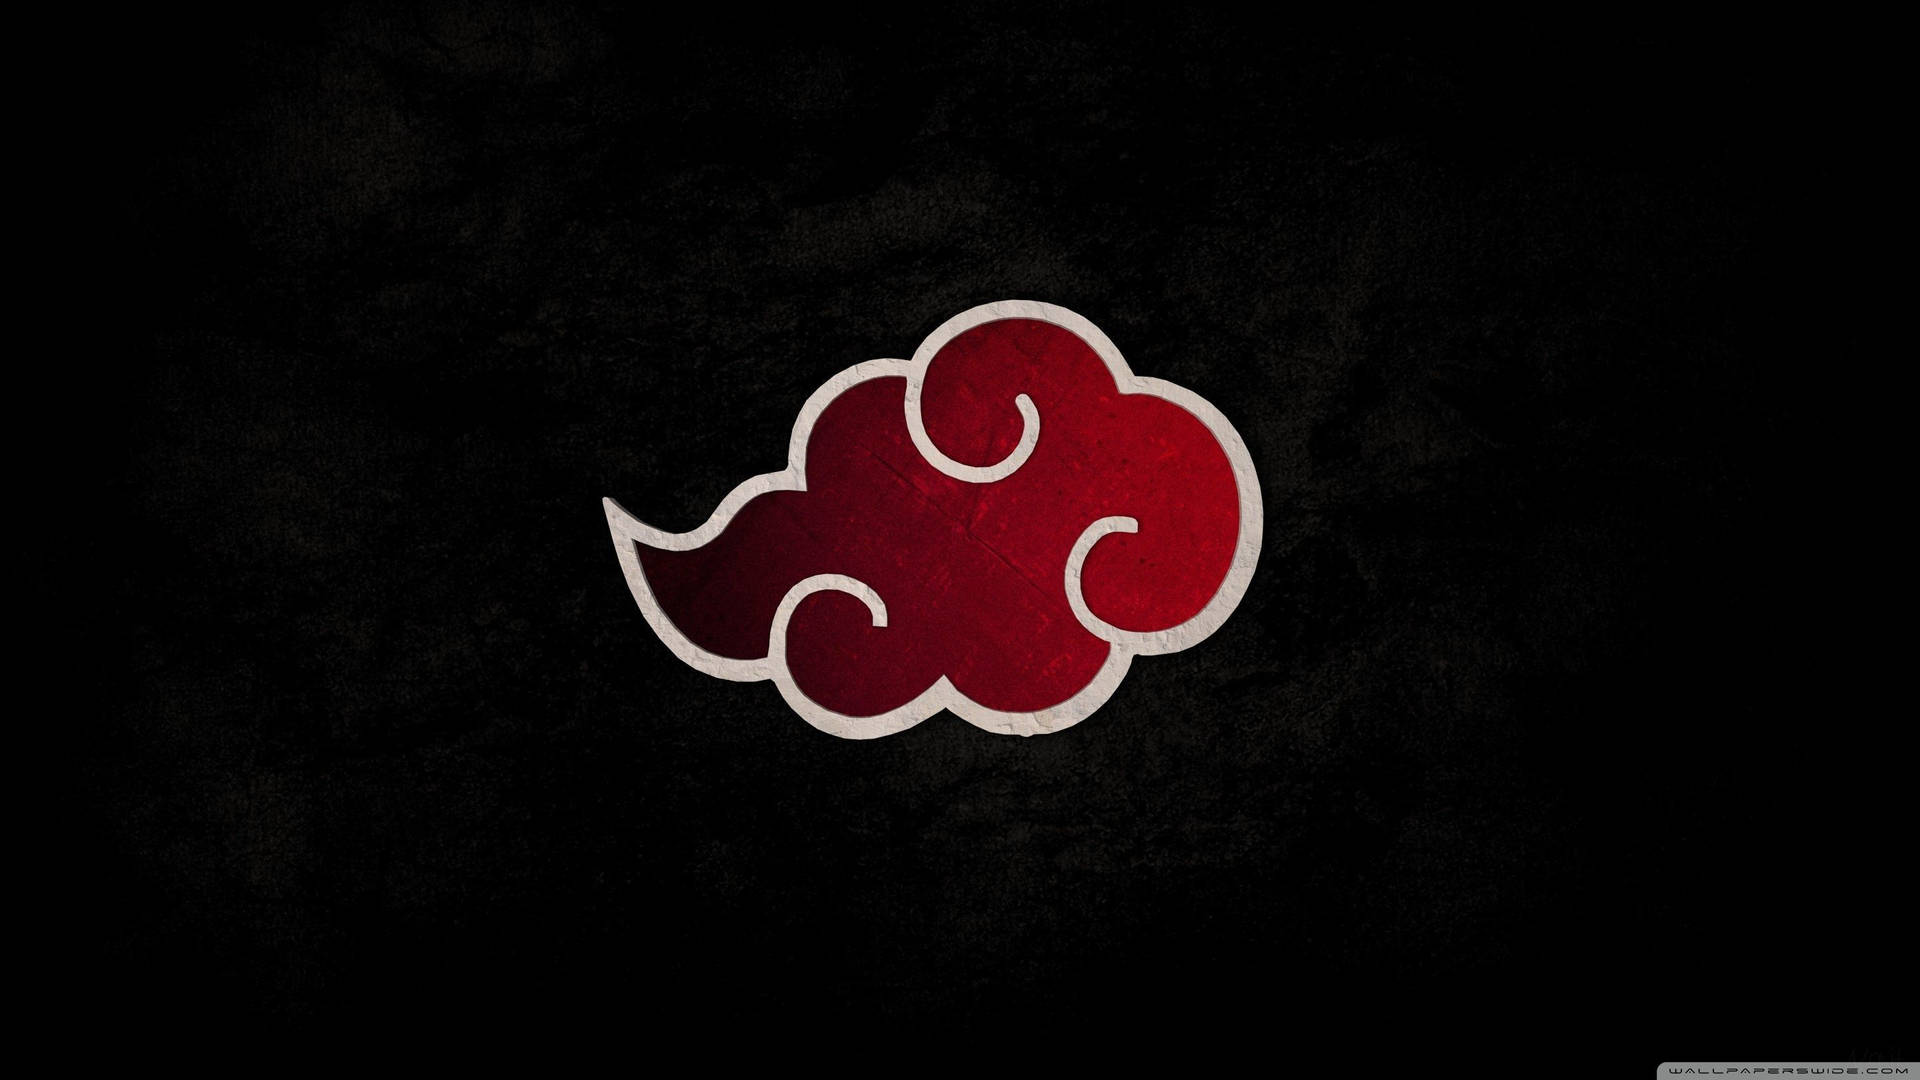 Caption: Intricate Red Cloud Symbol From Naruto Anime Series Background